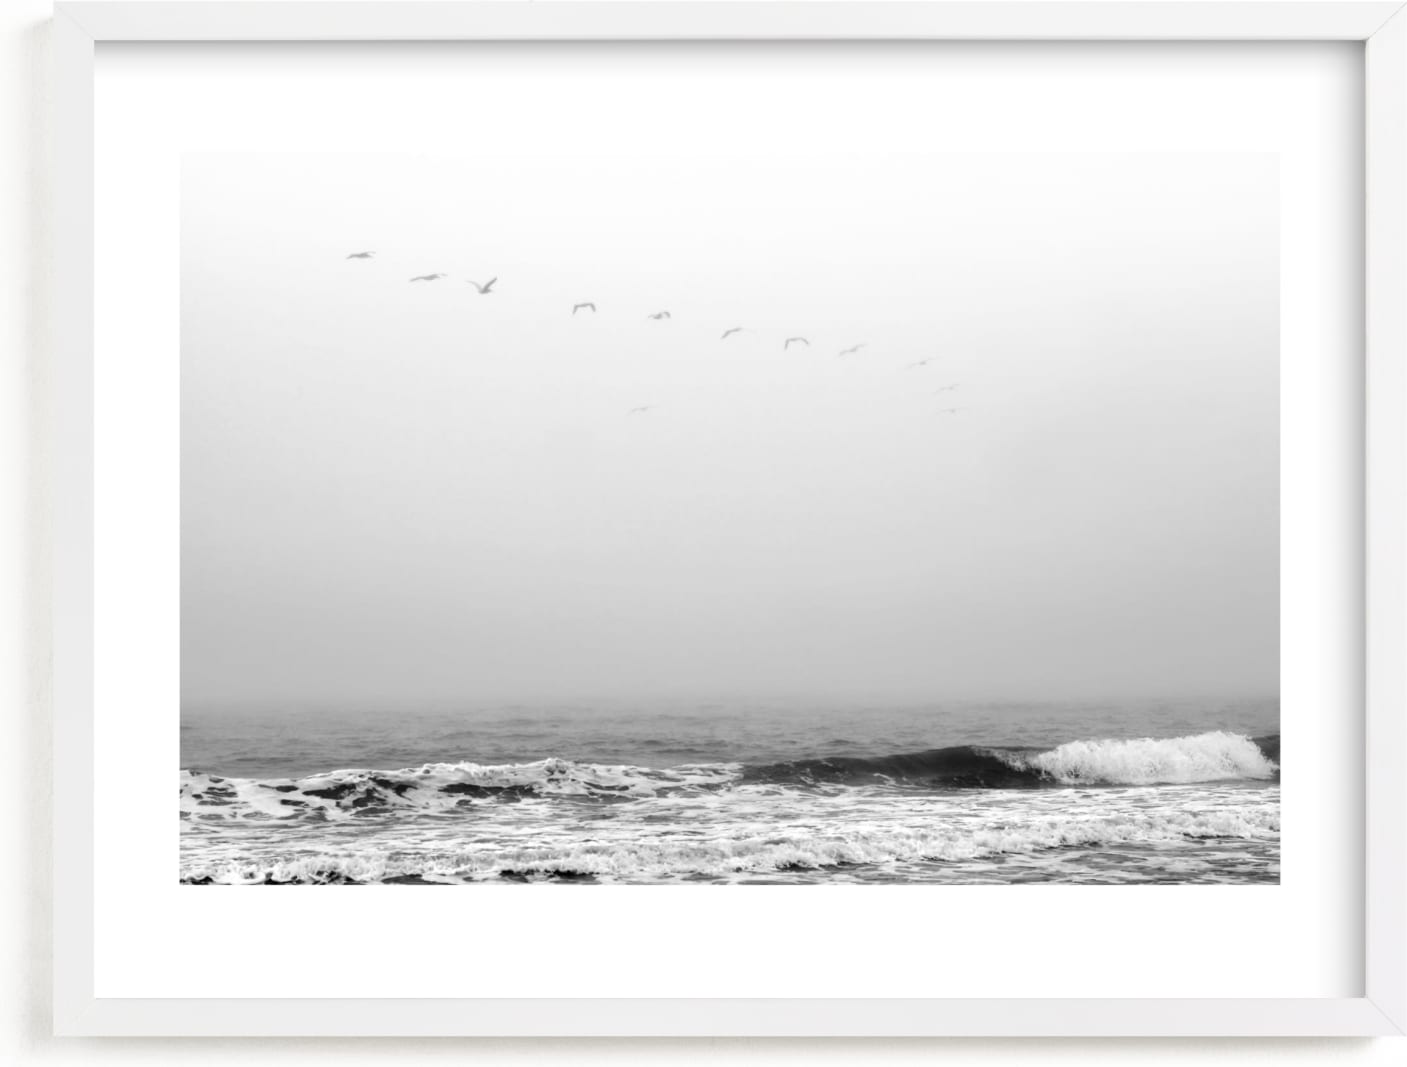 This is a black and white kids wall art by Janelle Wourms called Drifting Away.